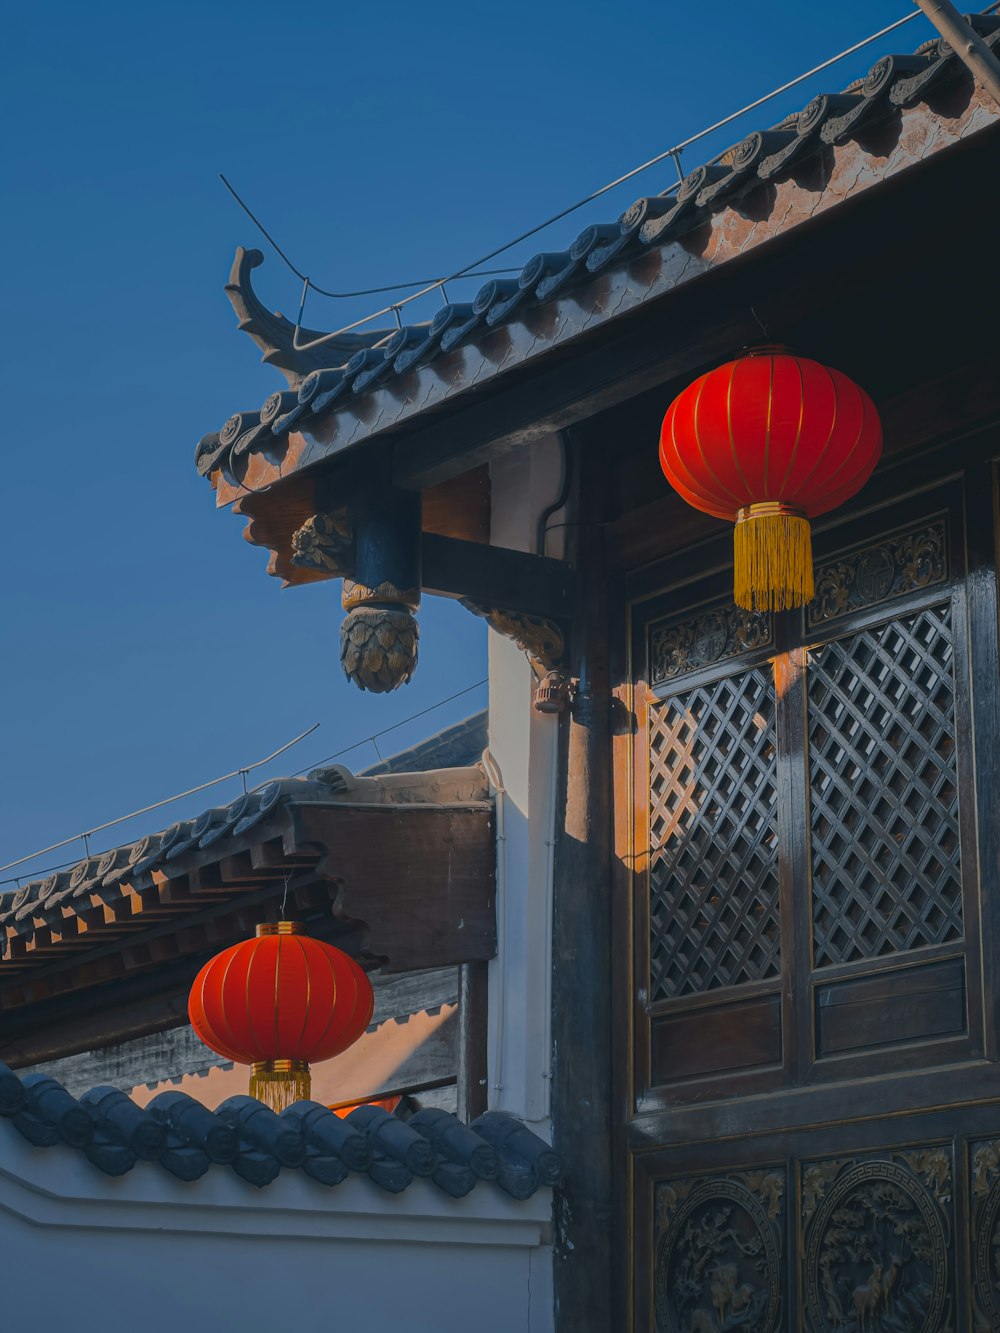 a couple of red lanterns hanging from the side of a building